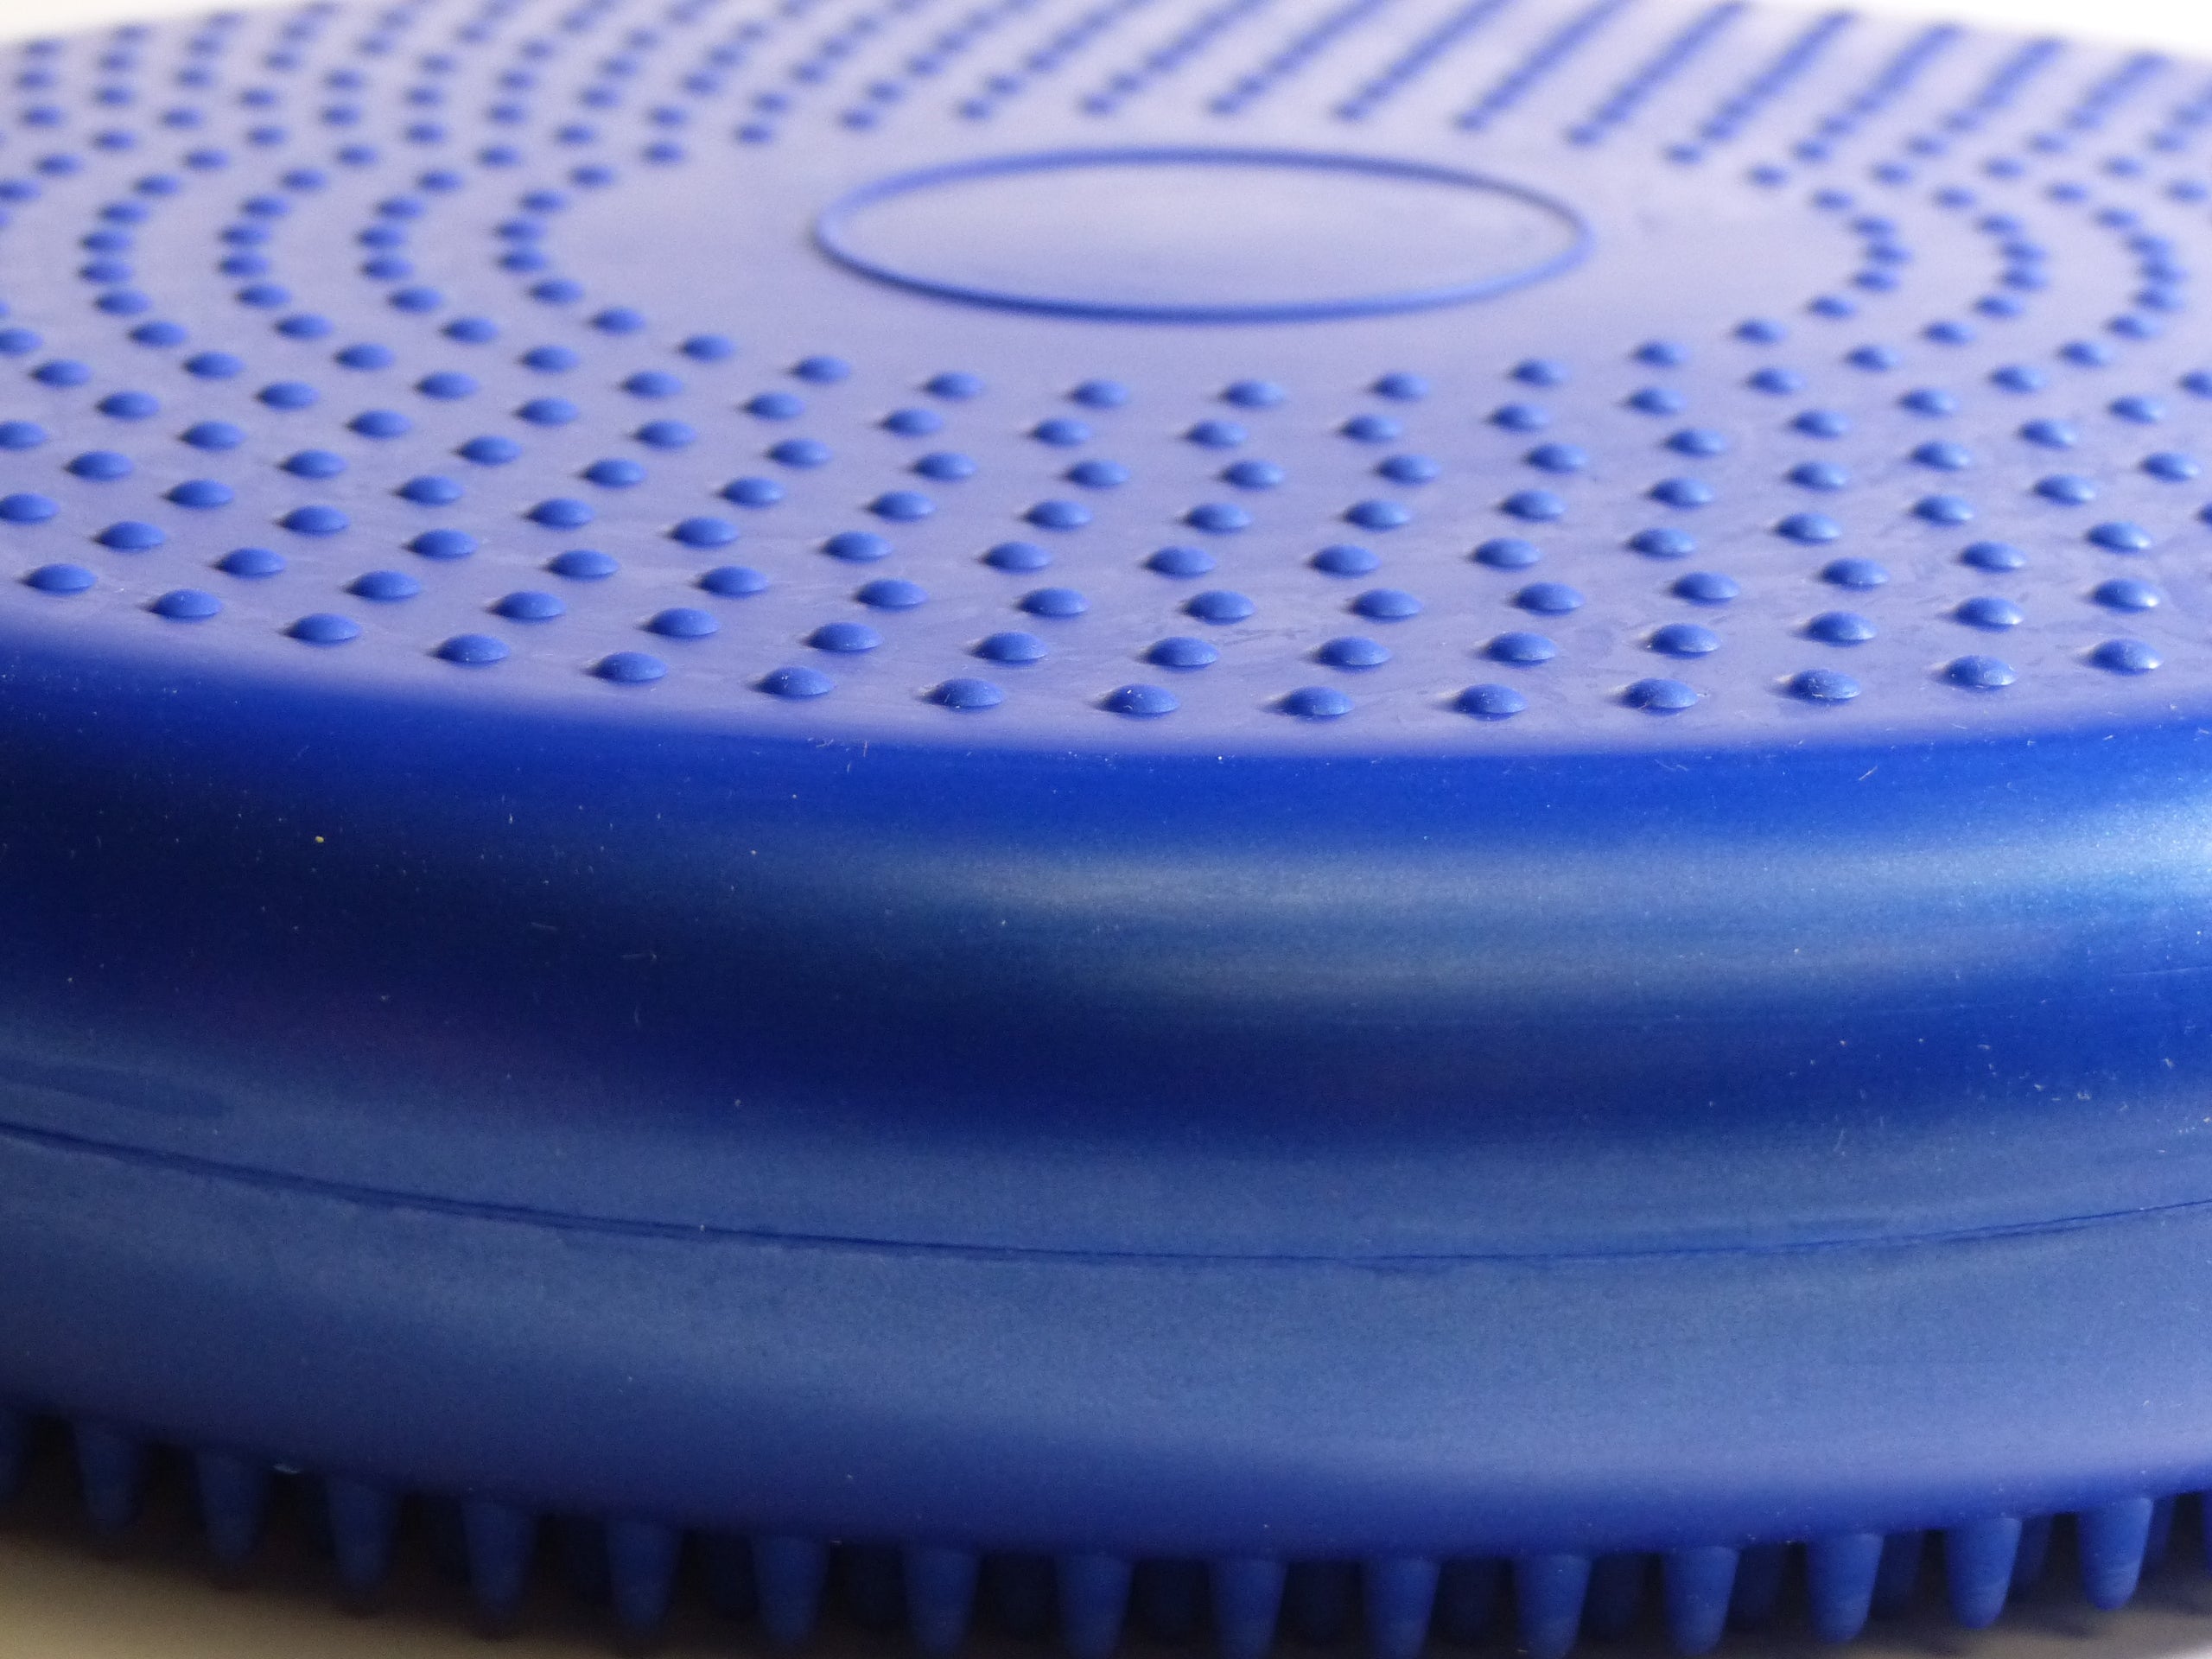 Round blue plastic cushion filled with air, with bumpy sides for grip and massage use. For standing on to improve balance, stability and core strength